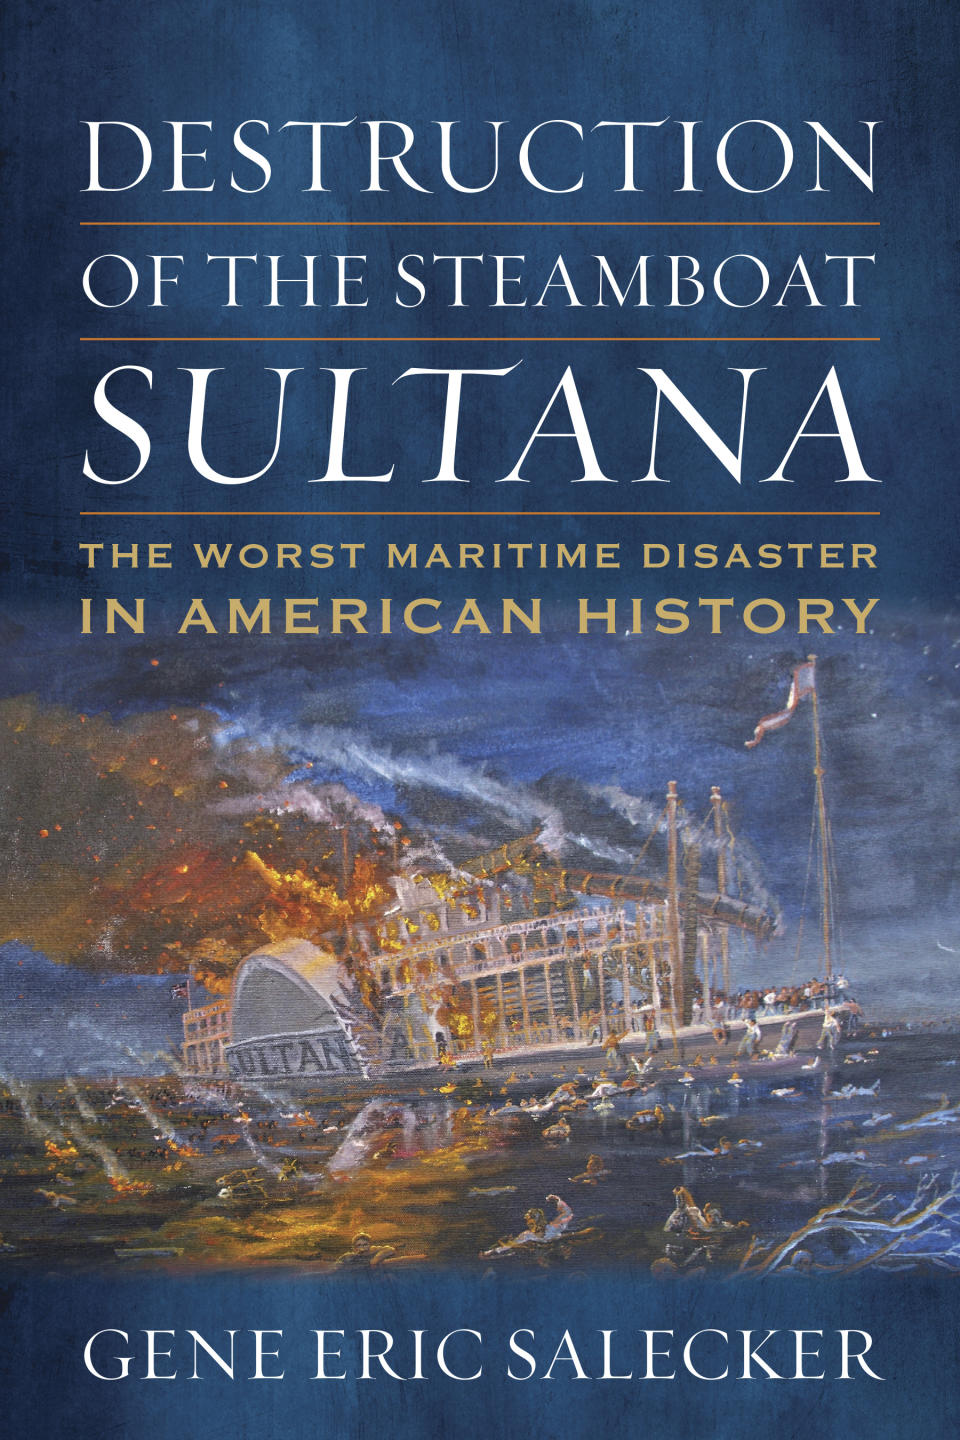 This cover image released by Naval Institute Press shows "Destruction of the Steamboat Sultana: The Worst Maritime Disaster in American History" by Gene Eric Salecker. (Naval Institute Press via AP)